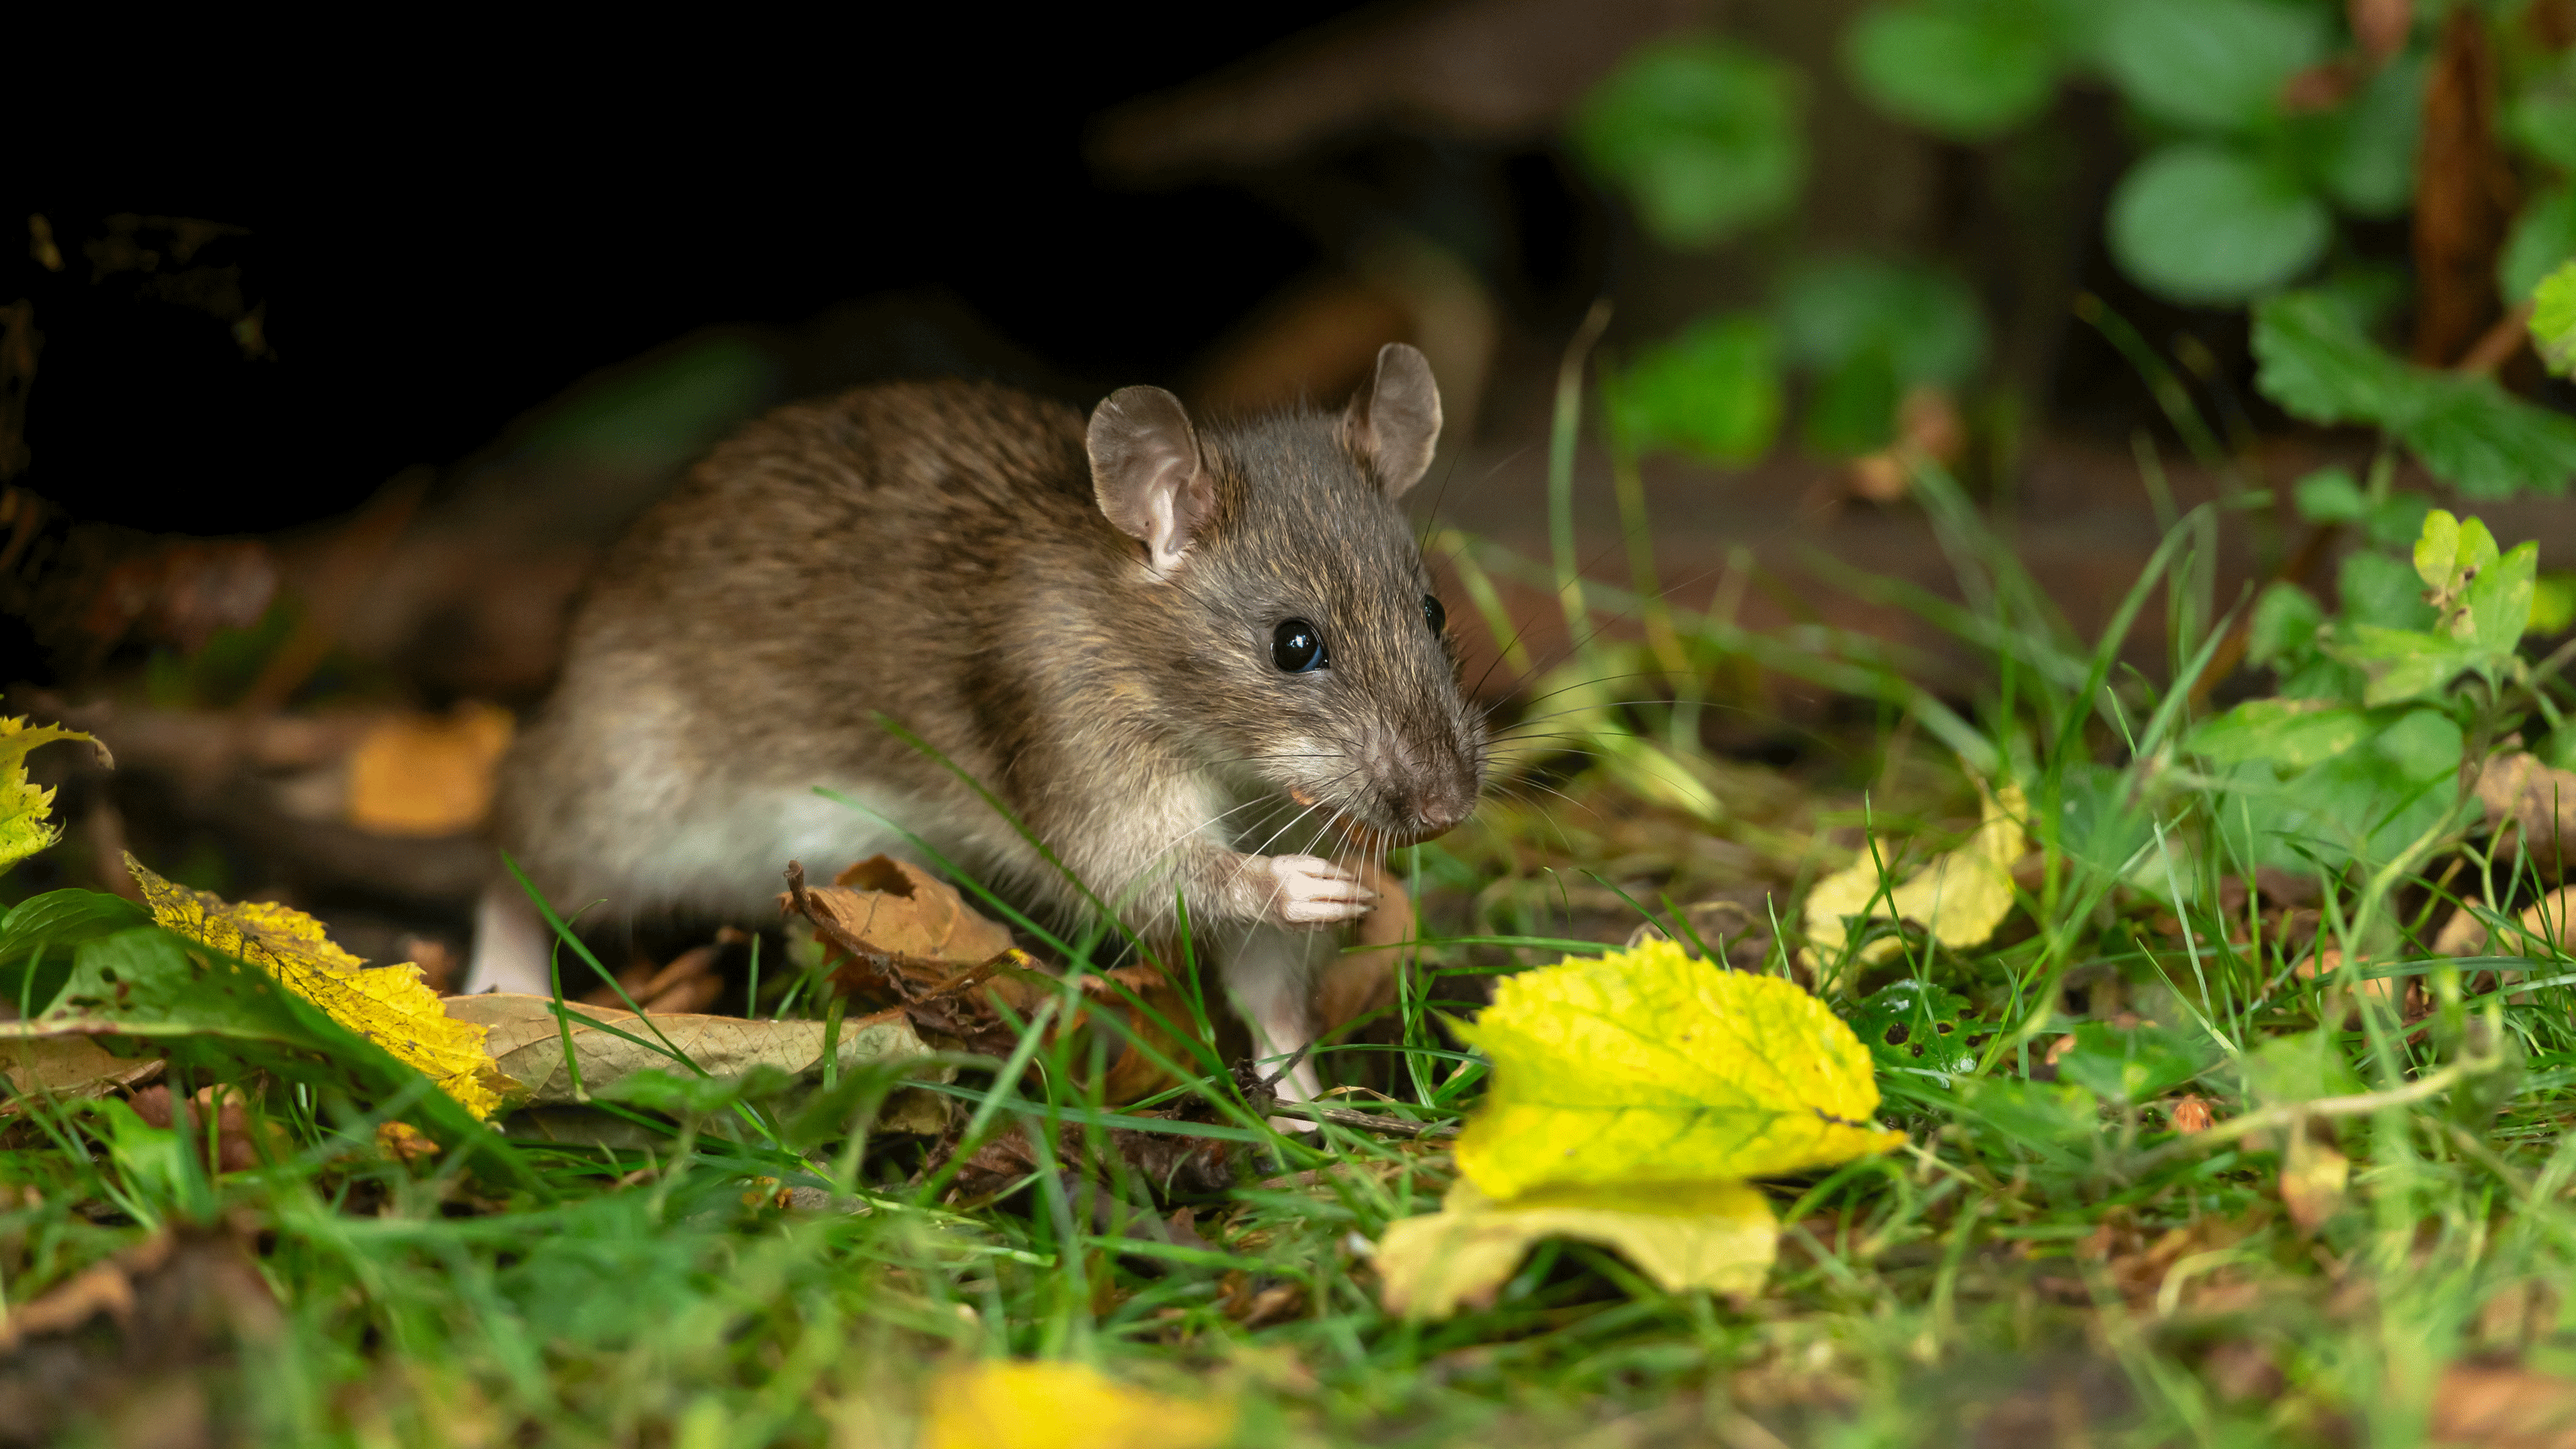 How to get rid of rats - 14 ways to banish these unwanted pests